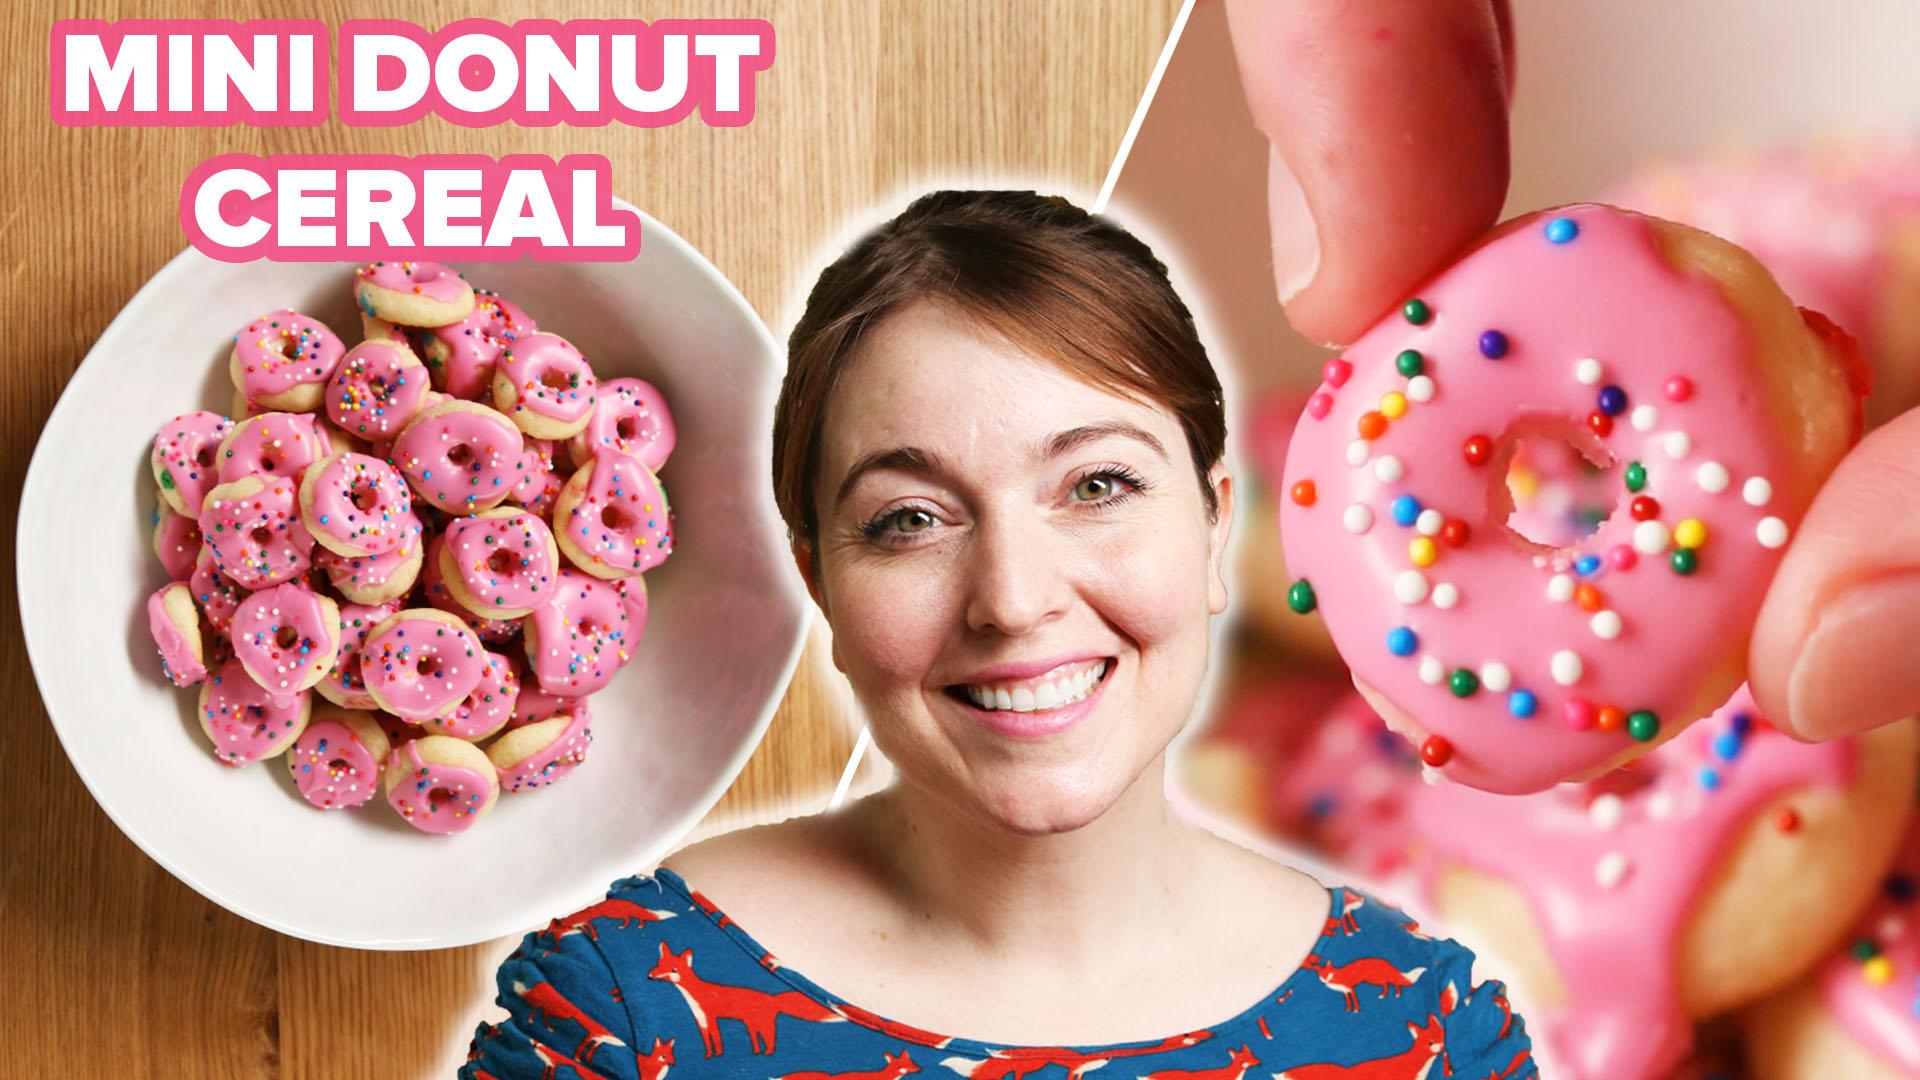 How to Make Cereal Out of Tiny Food, From Mini Doughnuts to Eggs